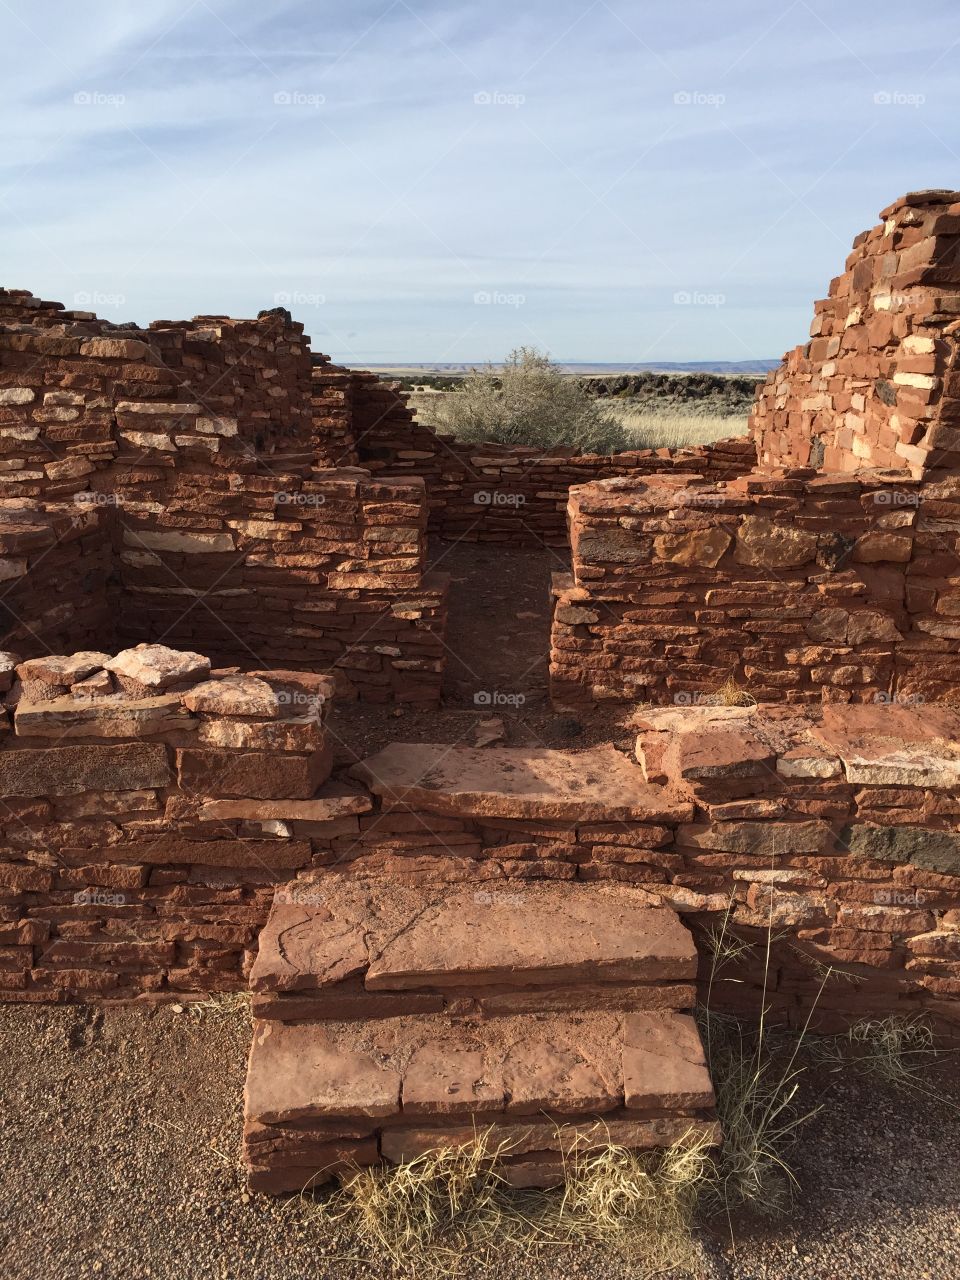 Former Farmers House. 1000 year old house in Arizona. 